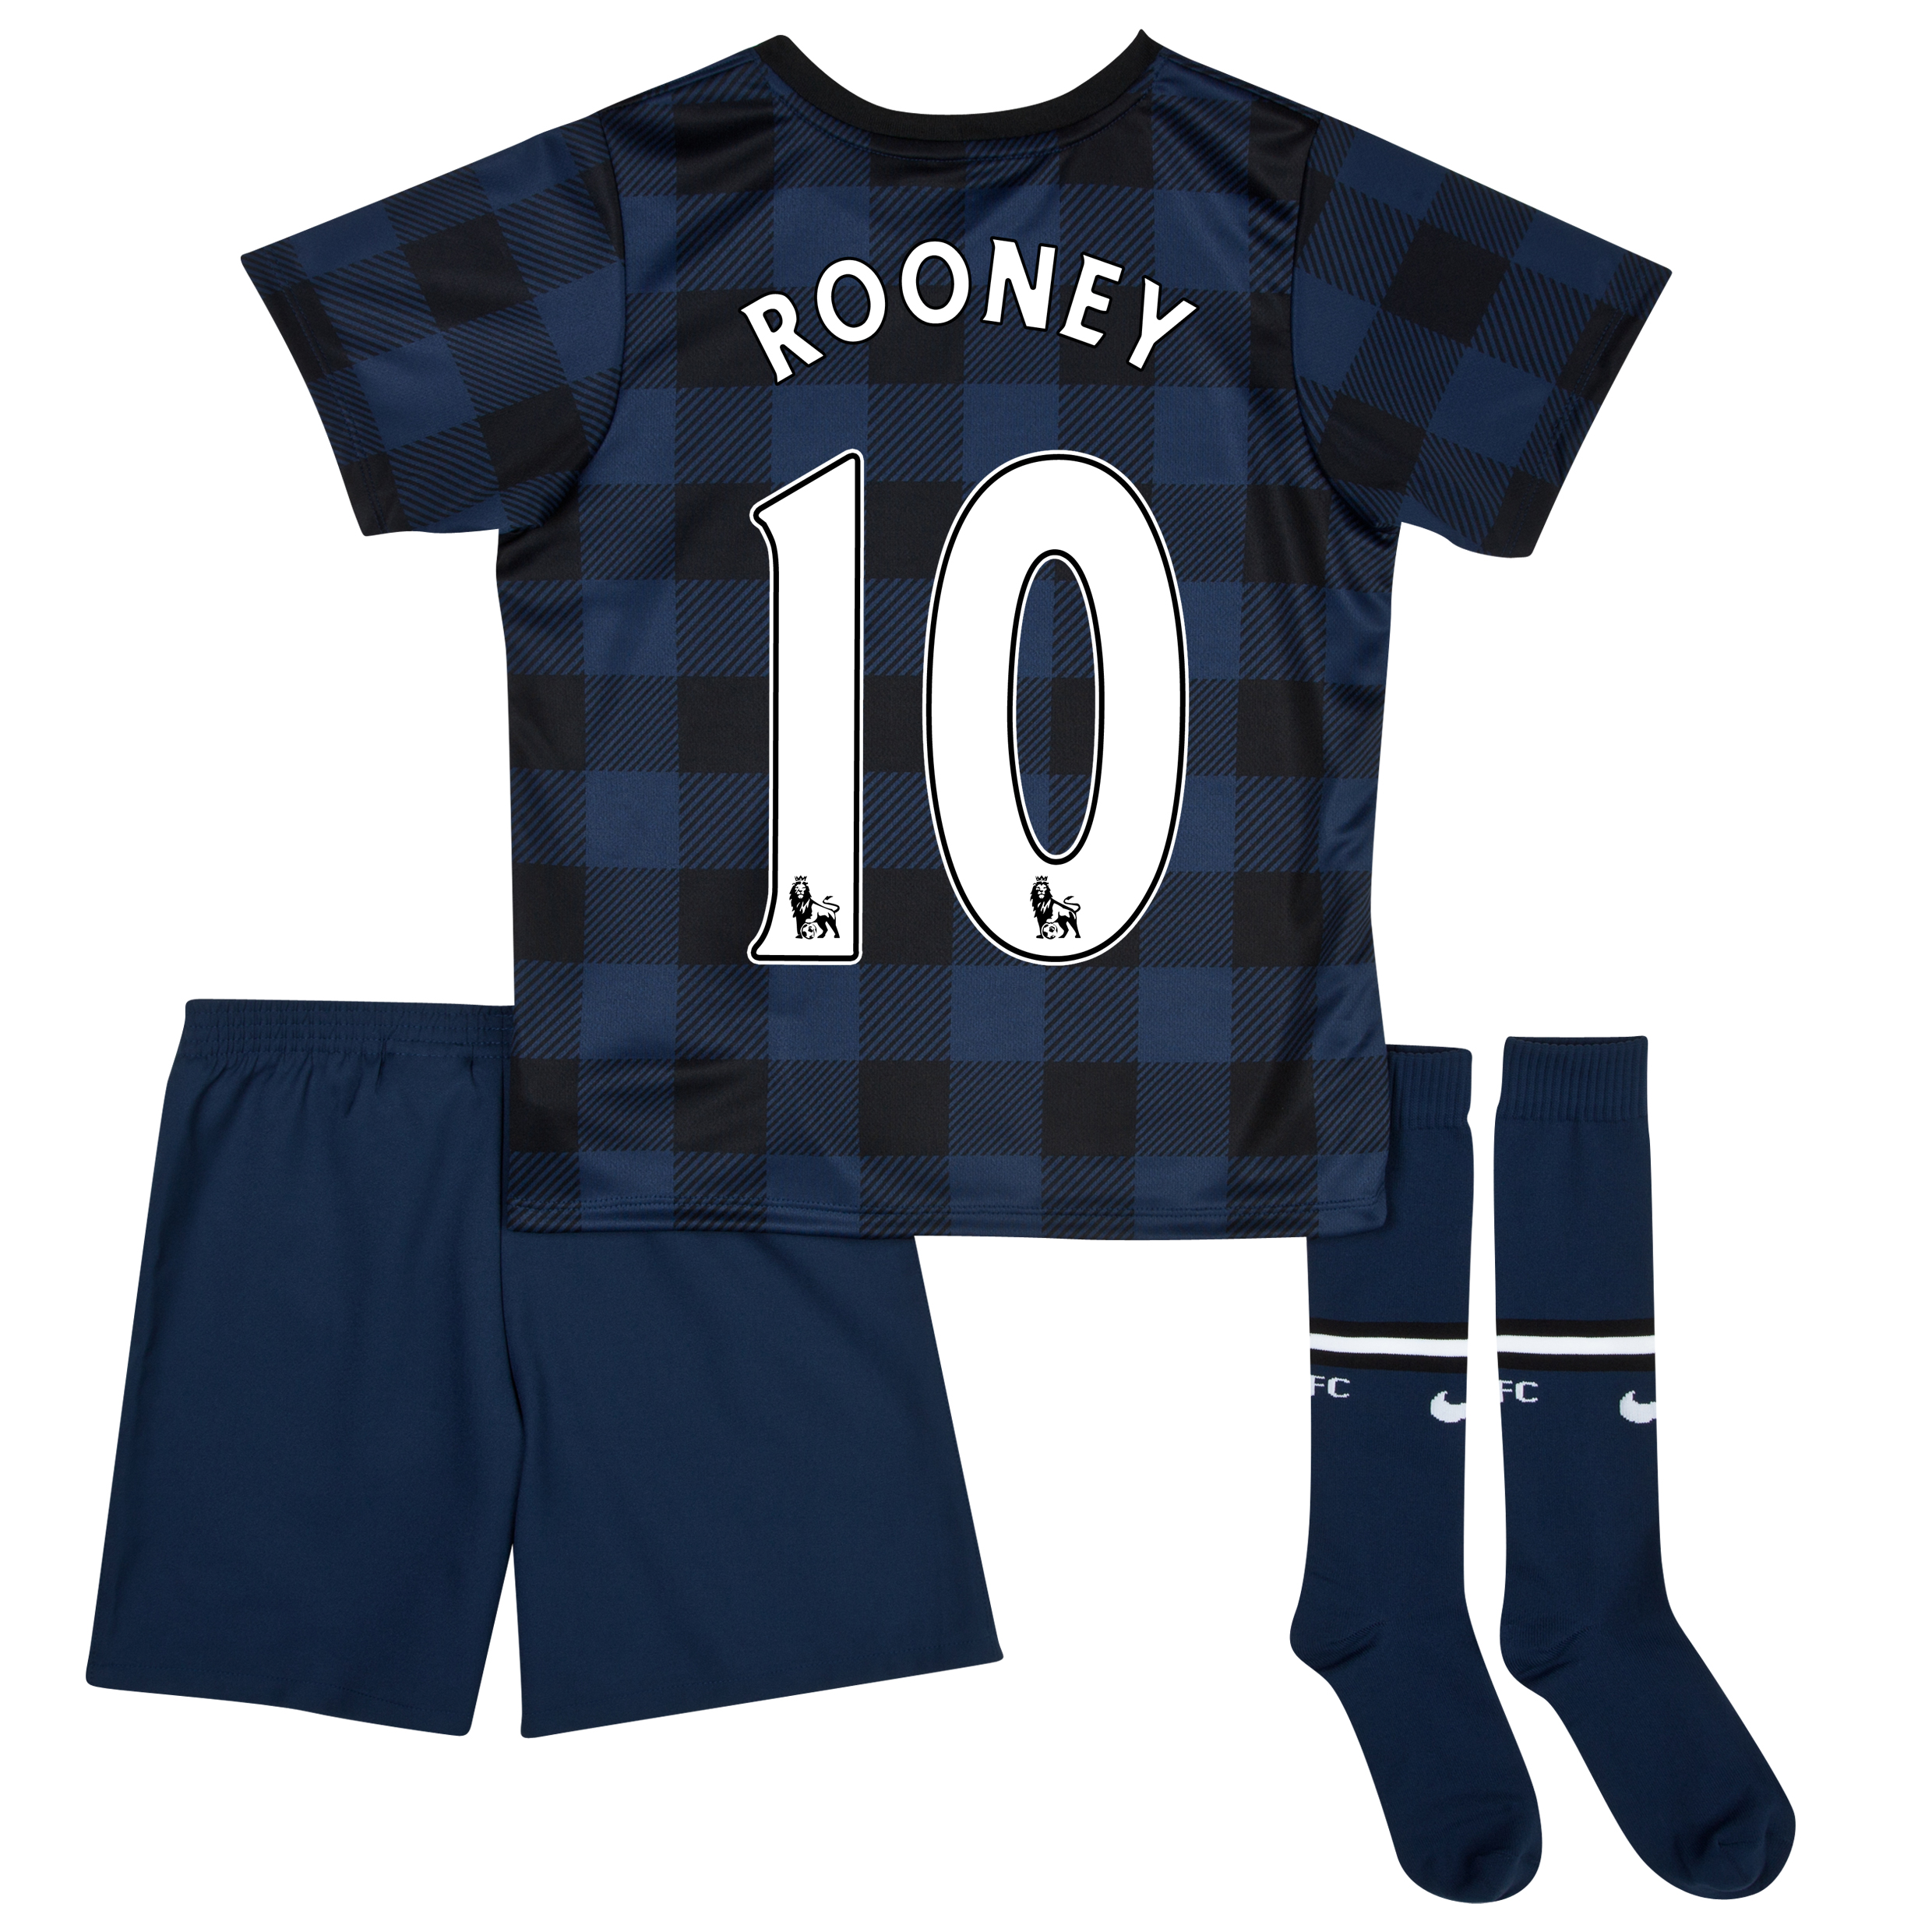 Manchester United Away Kit 2013/14 - Little Boys with Rooney 10 printing